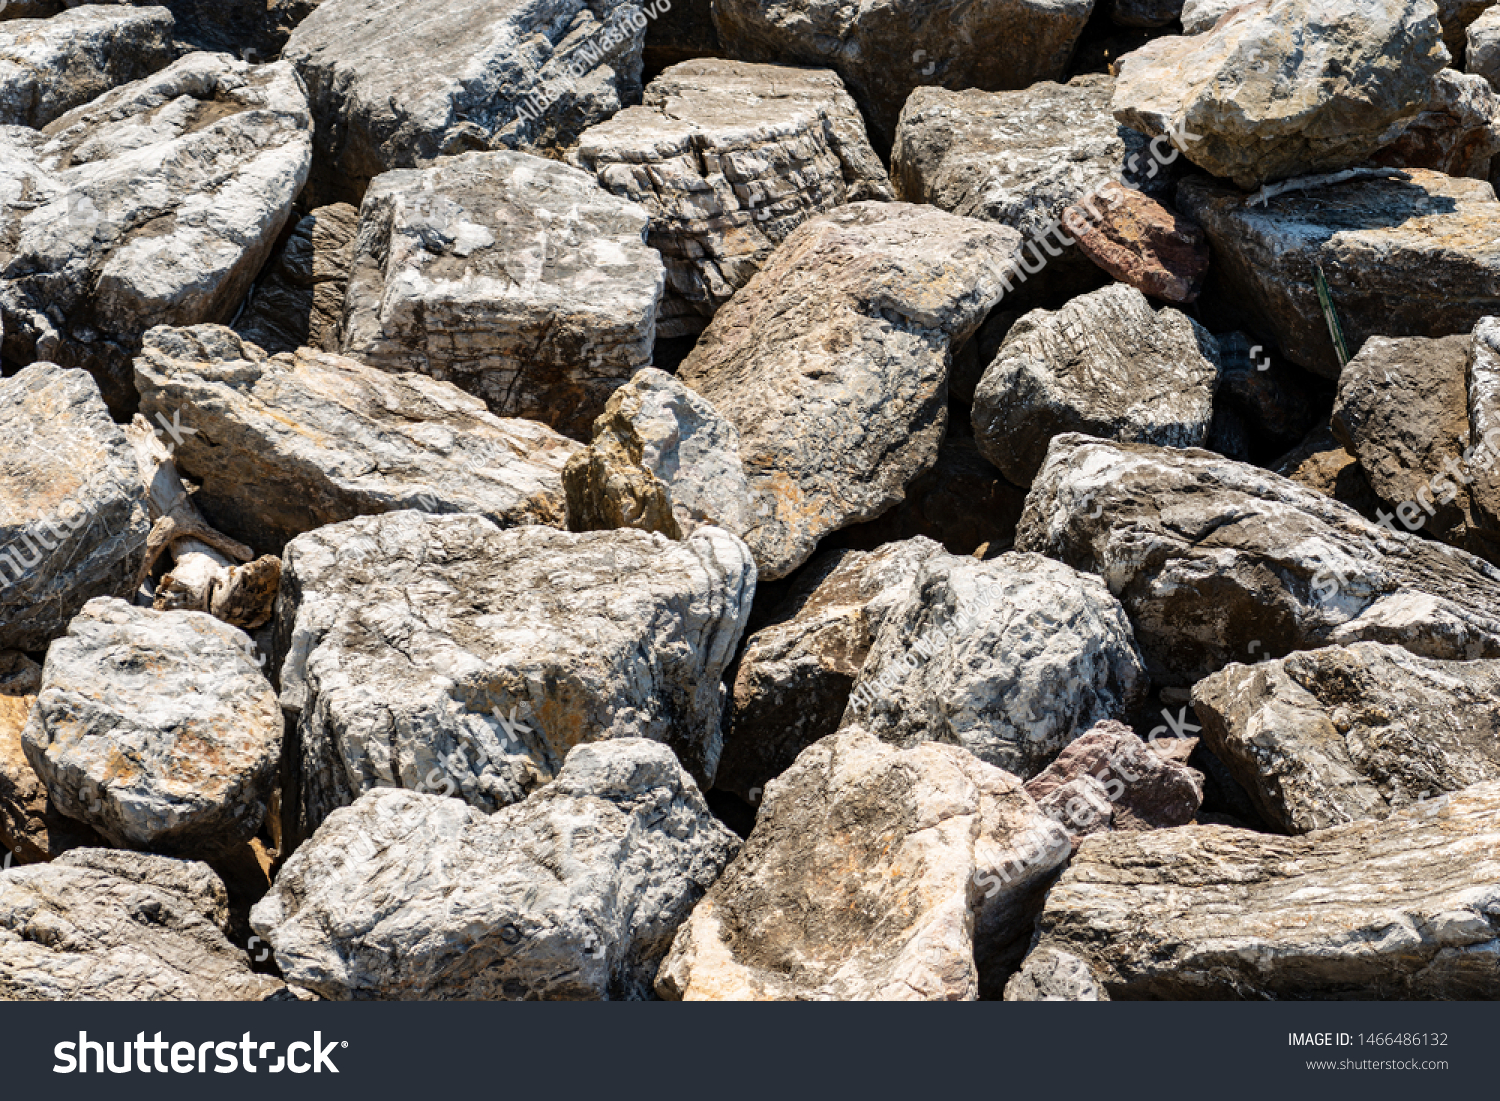 Closeup of a breakwater made of giant boulders by the sea, full frame. Liguria, Italy, Europe #1466486132